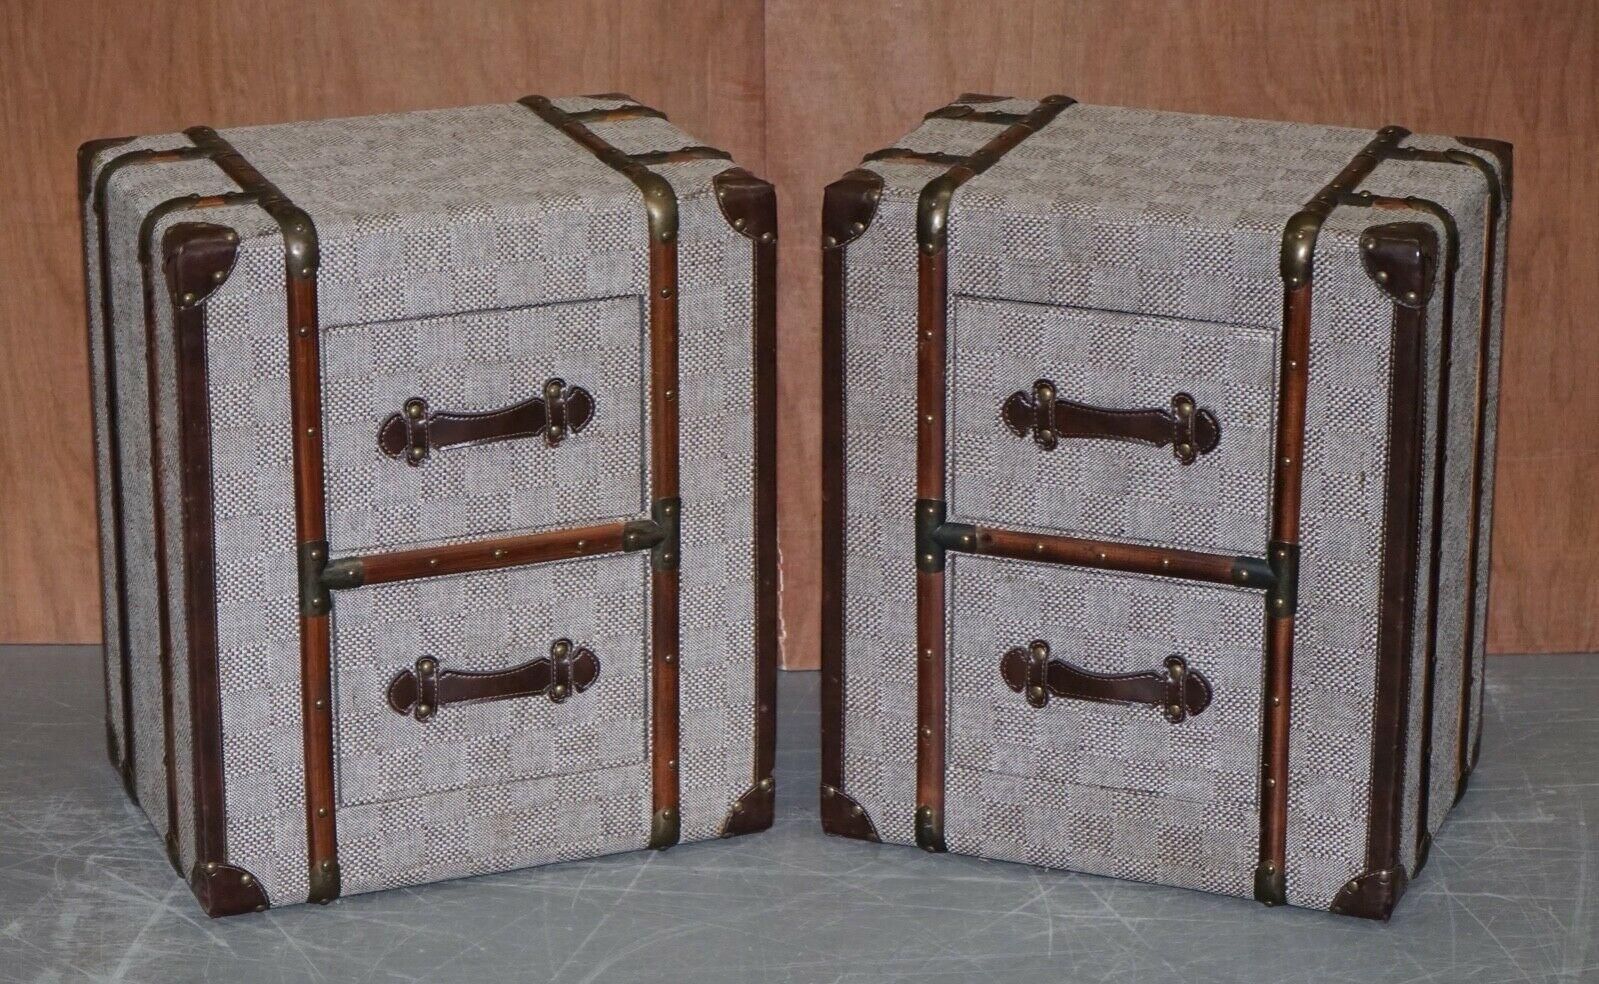 We are delighted to offer for sale these absolutely stunning Timothy Oulton style bedside tables in grey fabric, the handles are made of leather and there are beautiful wood details around, giving your bedroom a lovely style.

We have cleaned